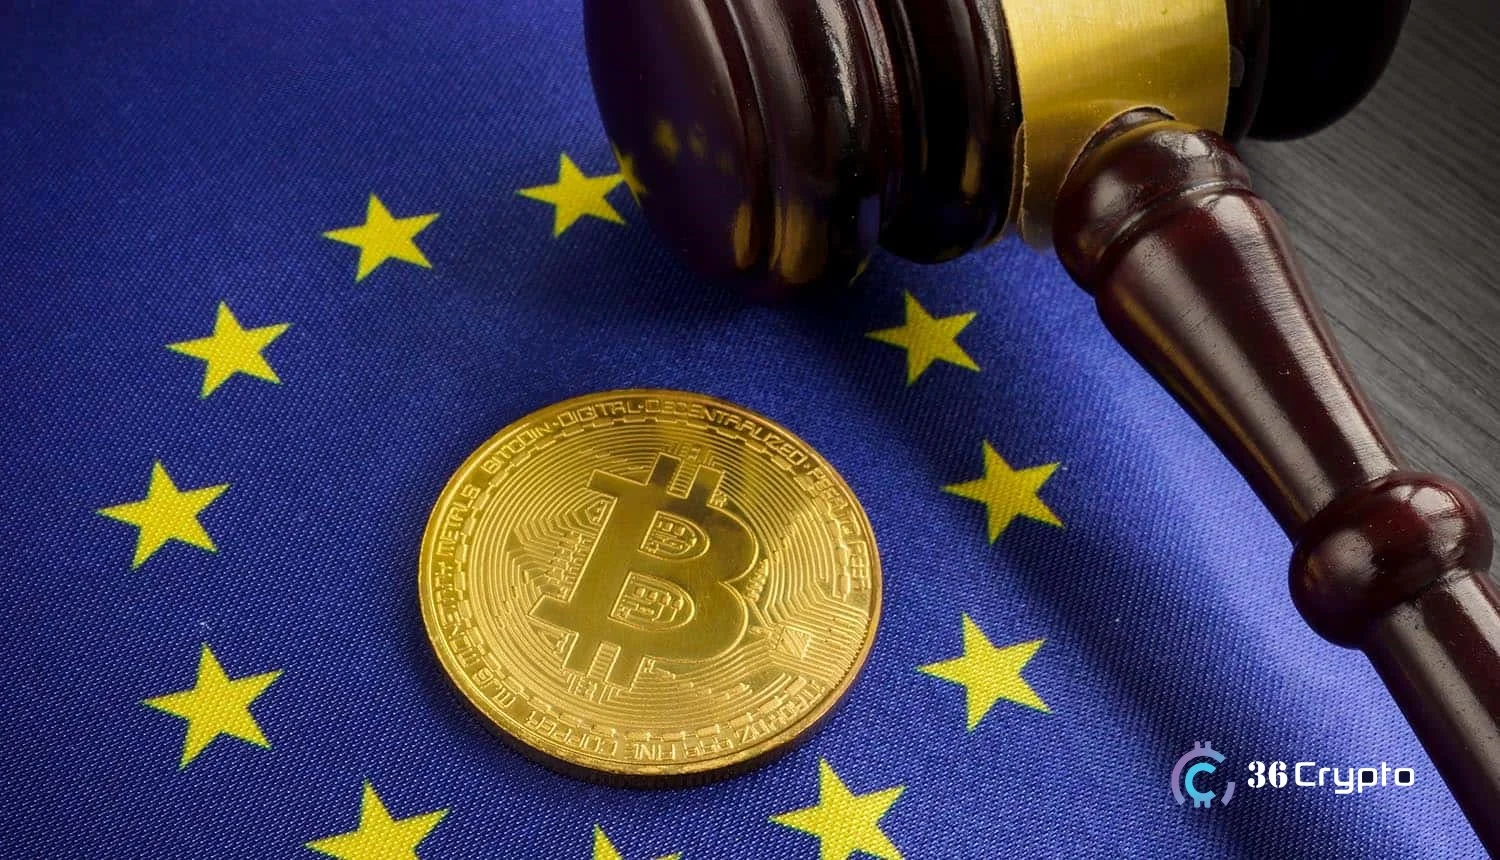 BREAKING!! New cryptocurrency regulations approved by EU parliament